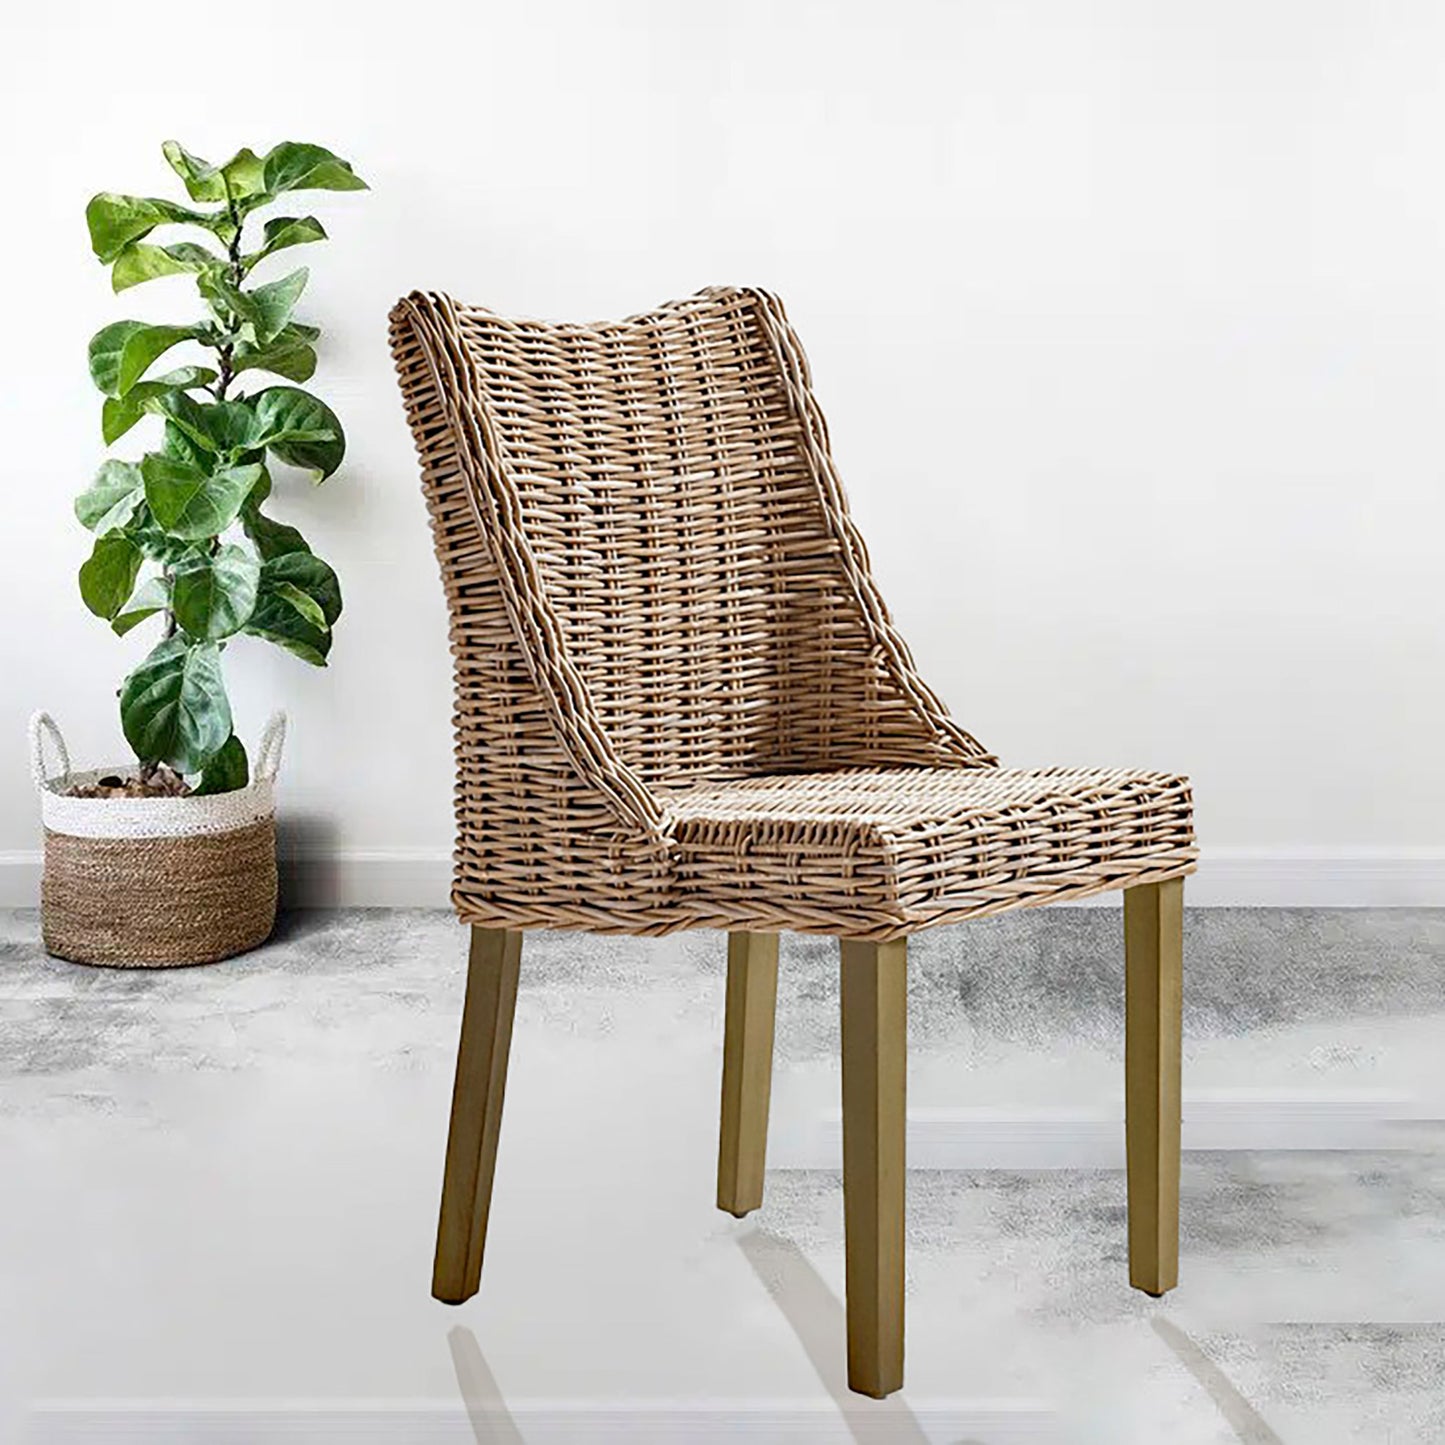 Natural Hand Weaved Rattan Wicker & Wood Dining Chair or High Weave Hand Made Kitchen Rattan Bar Stool with Wooden Legs